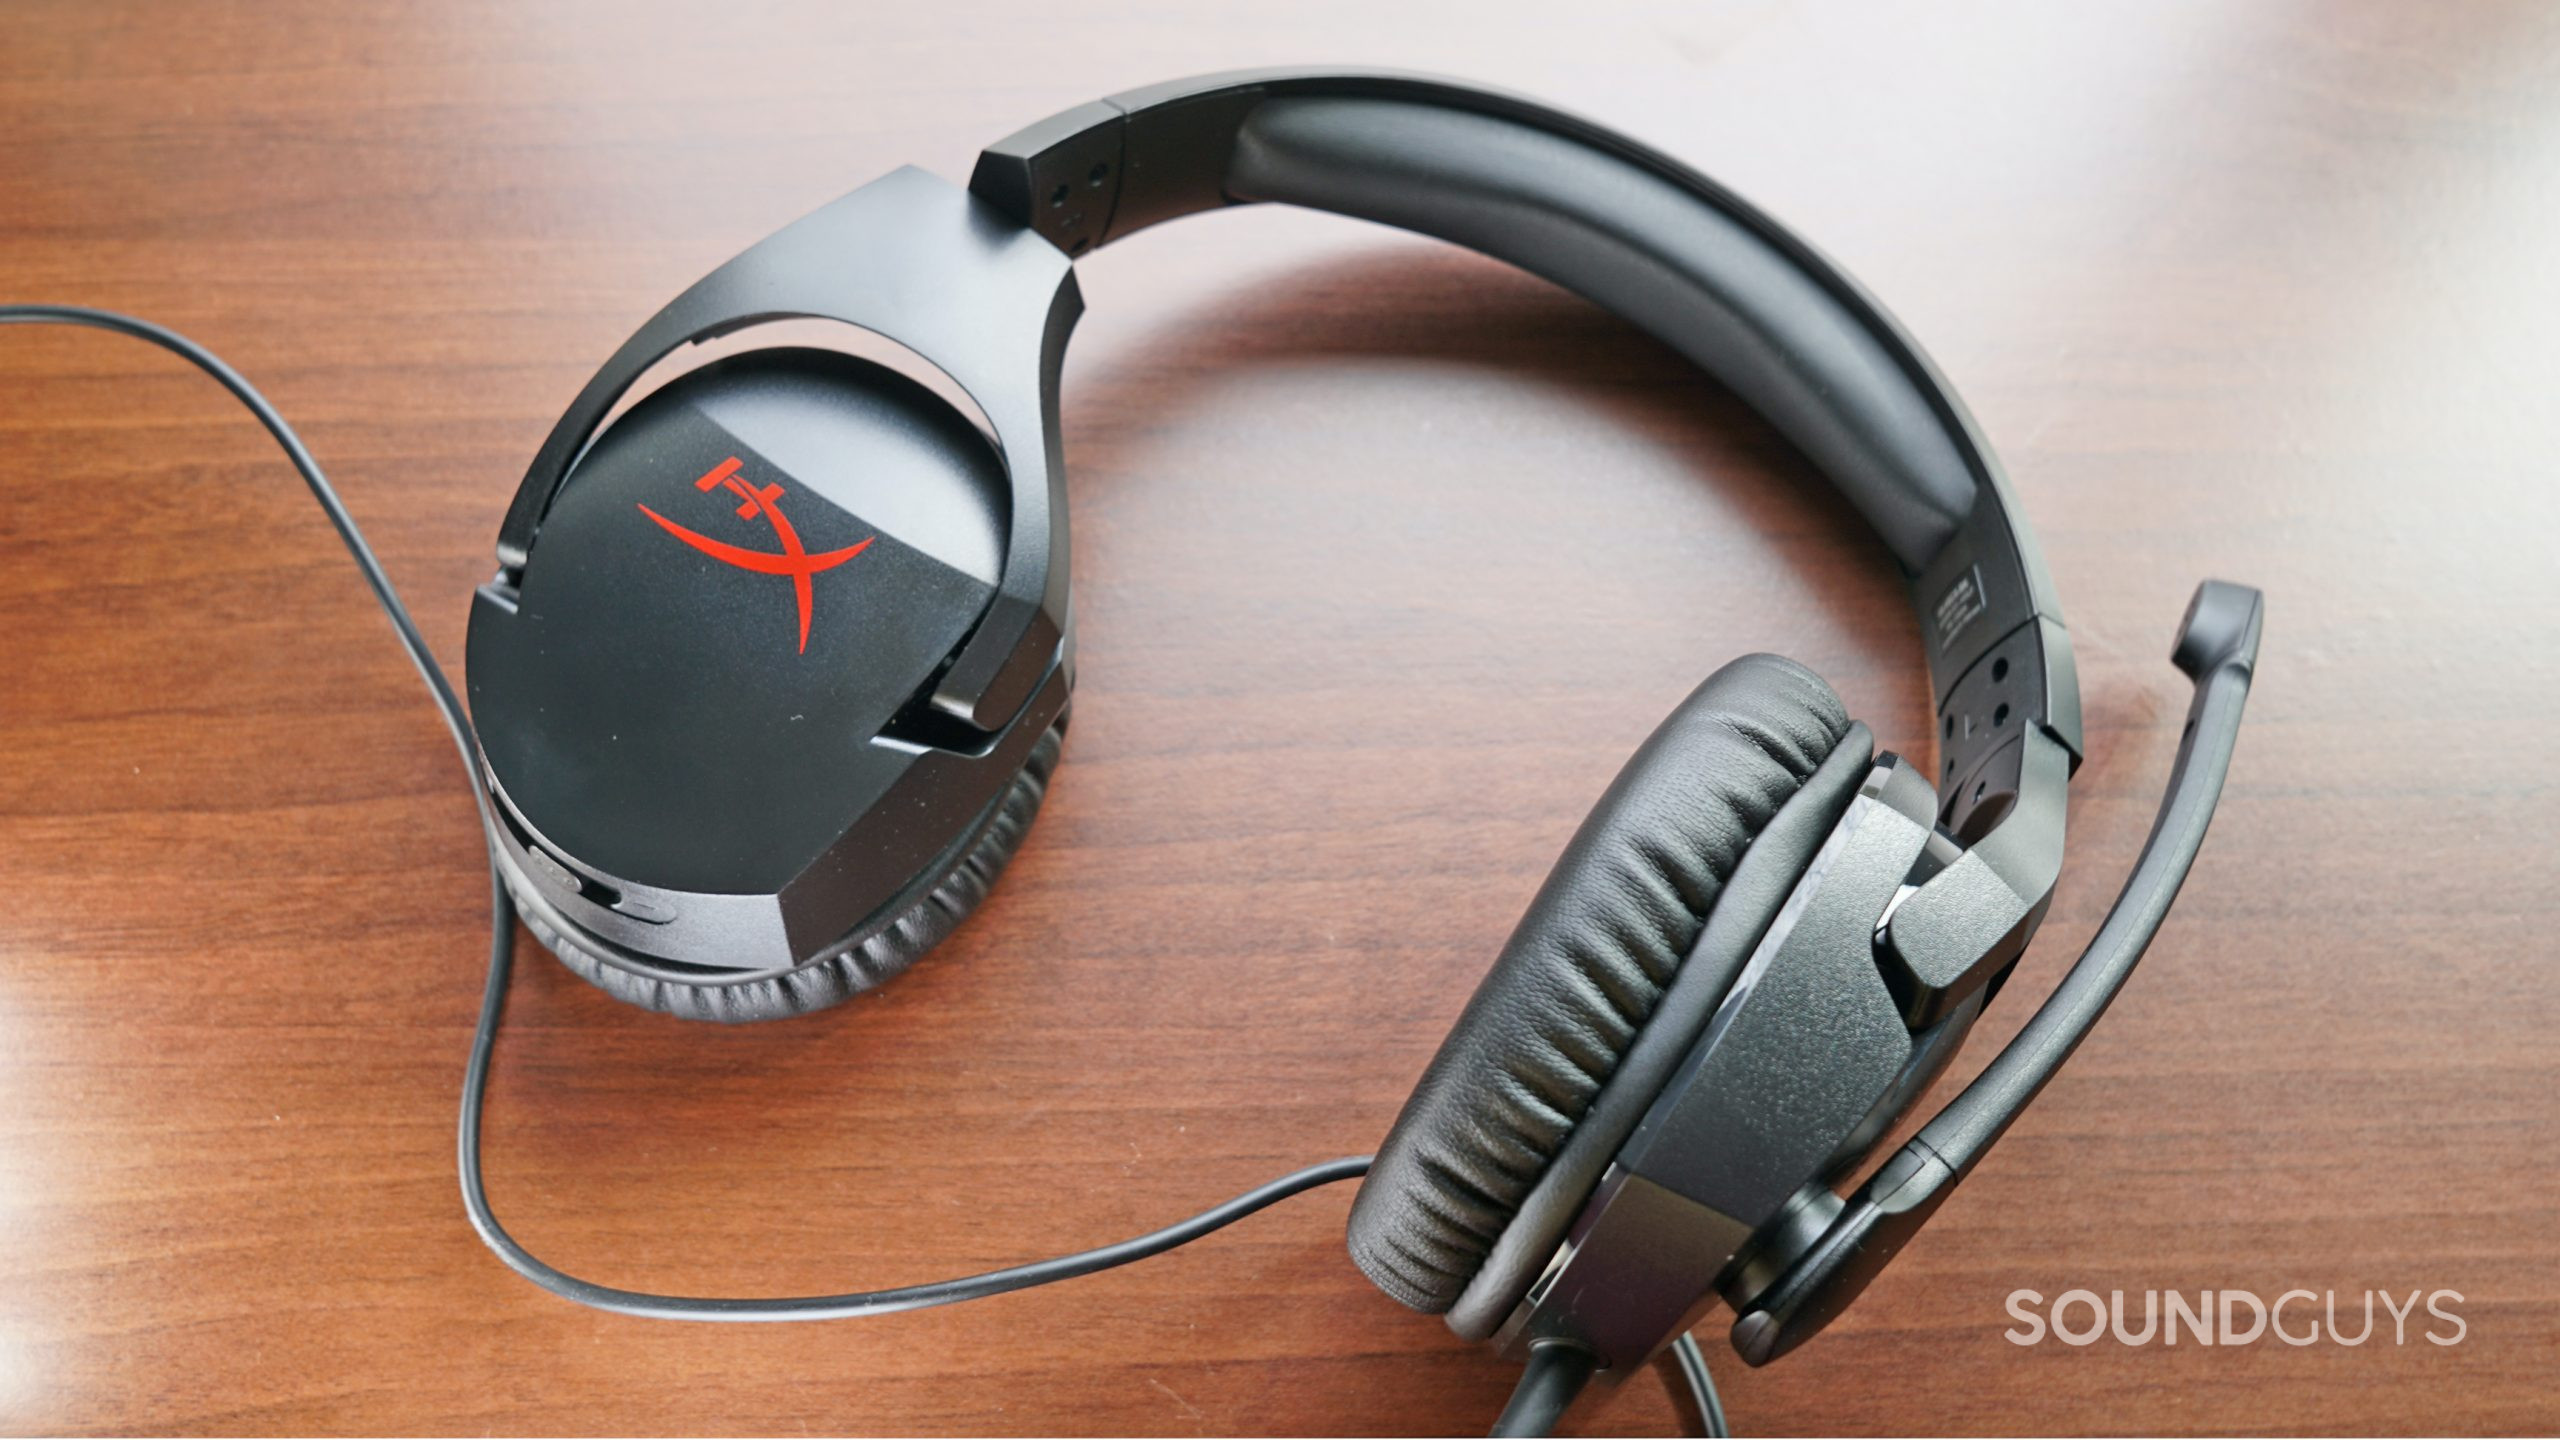 The HyperX Cloud Stinger gaming headset lays on a wooden surface.